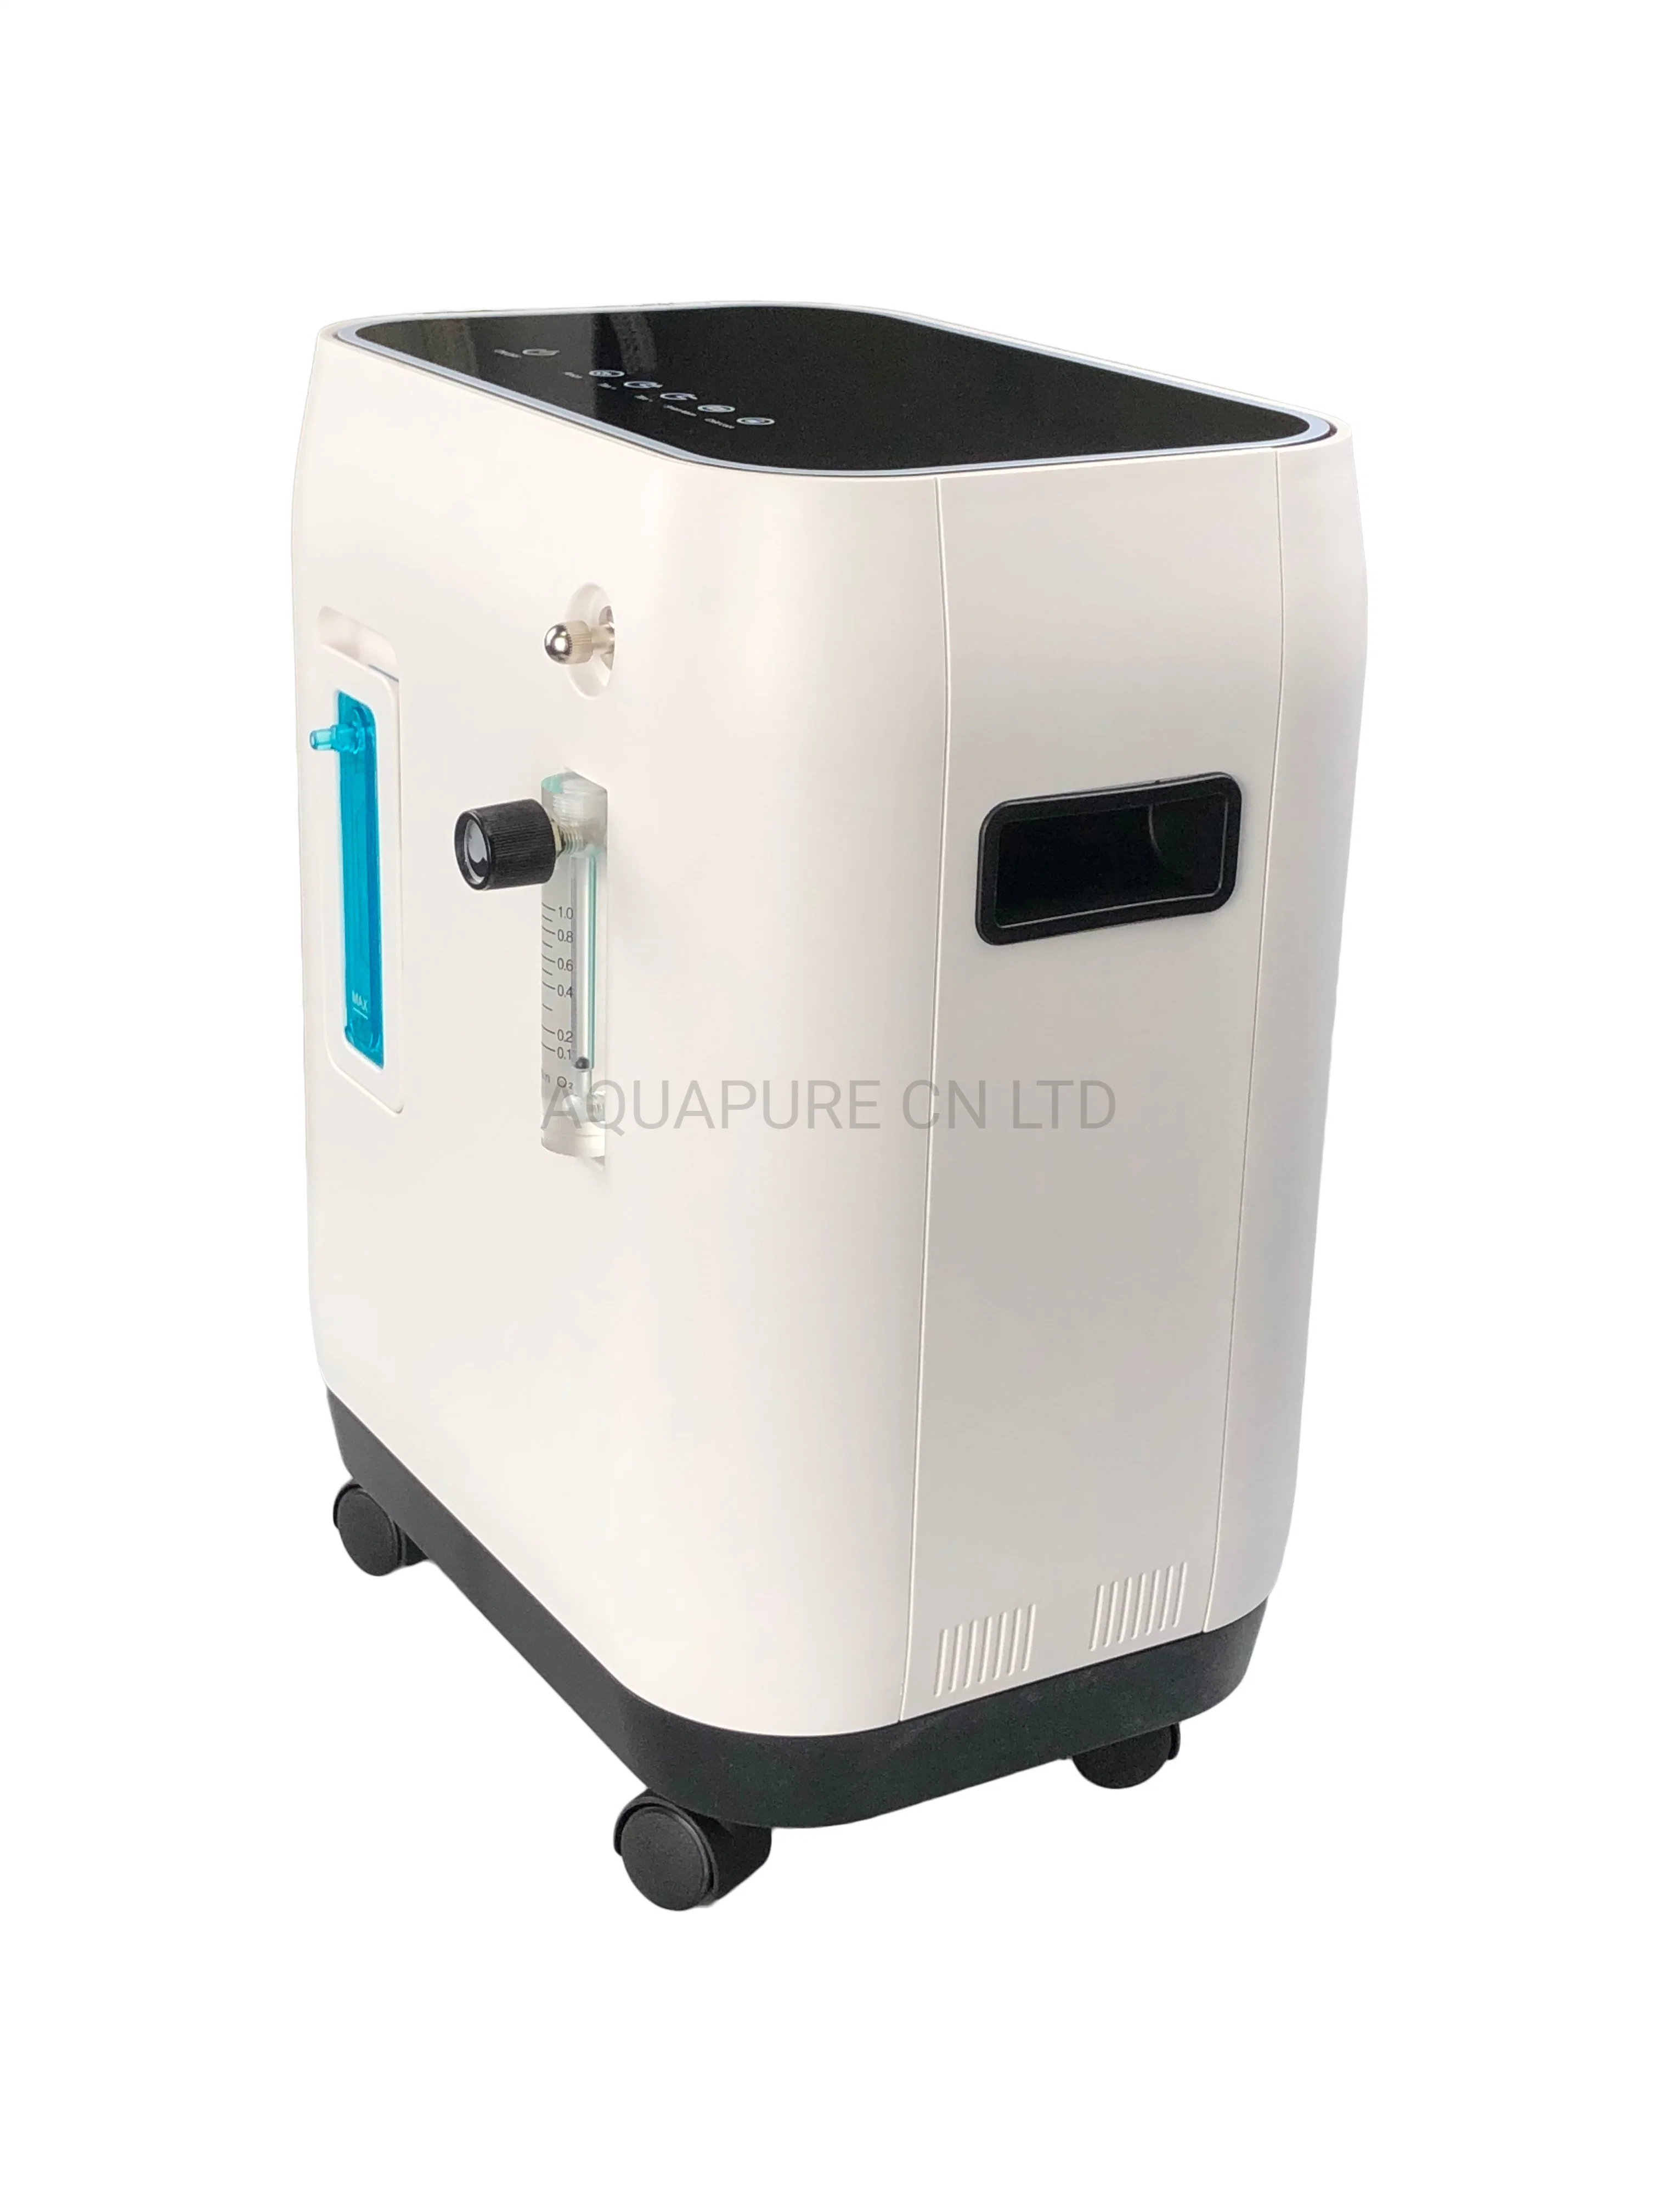 Aquapure Factory Direct Price Porble Oxygen Psa Medical Oxygen Concentrator